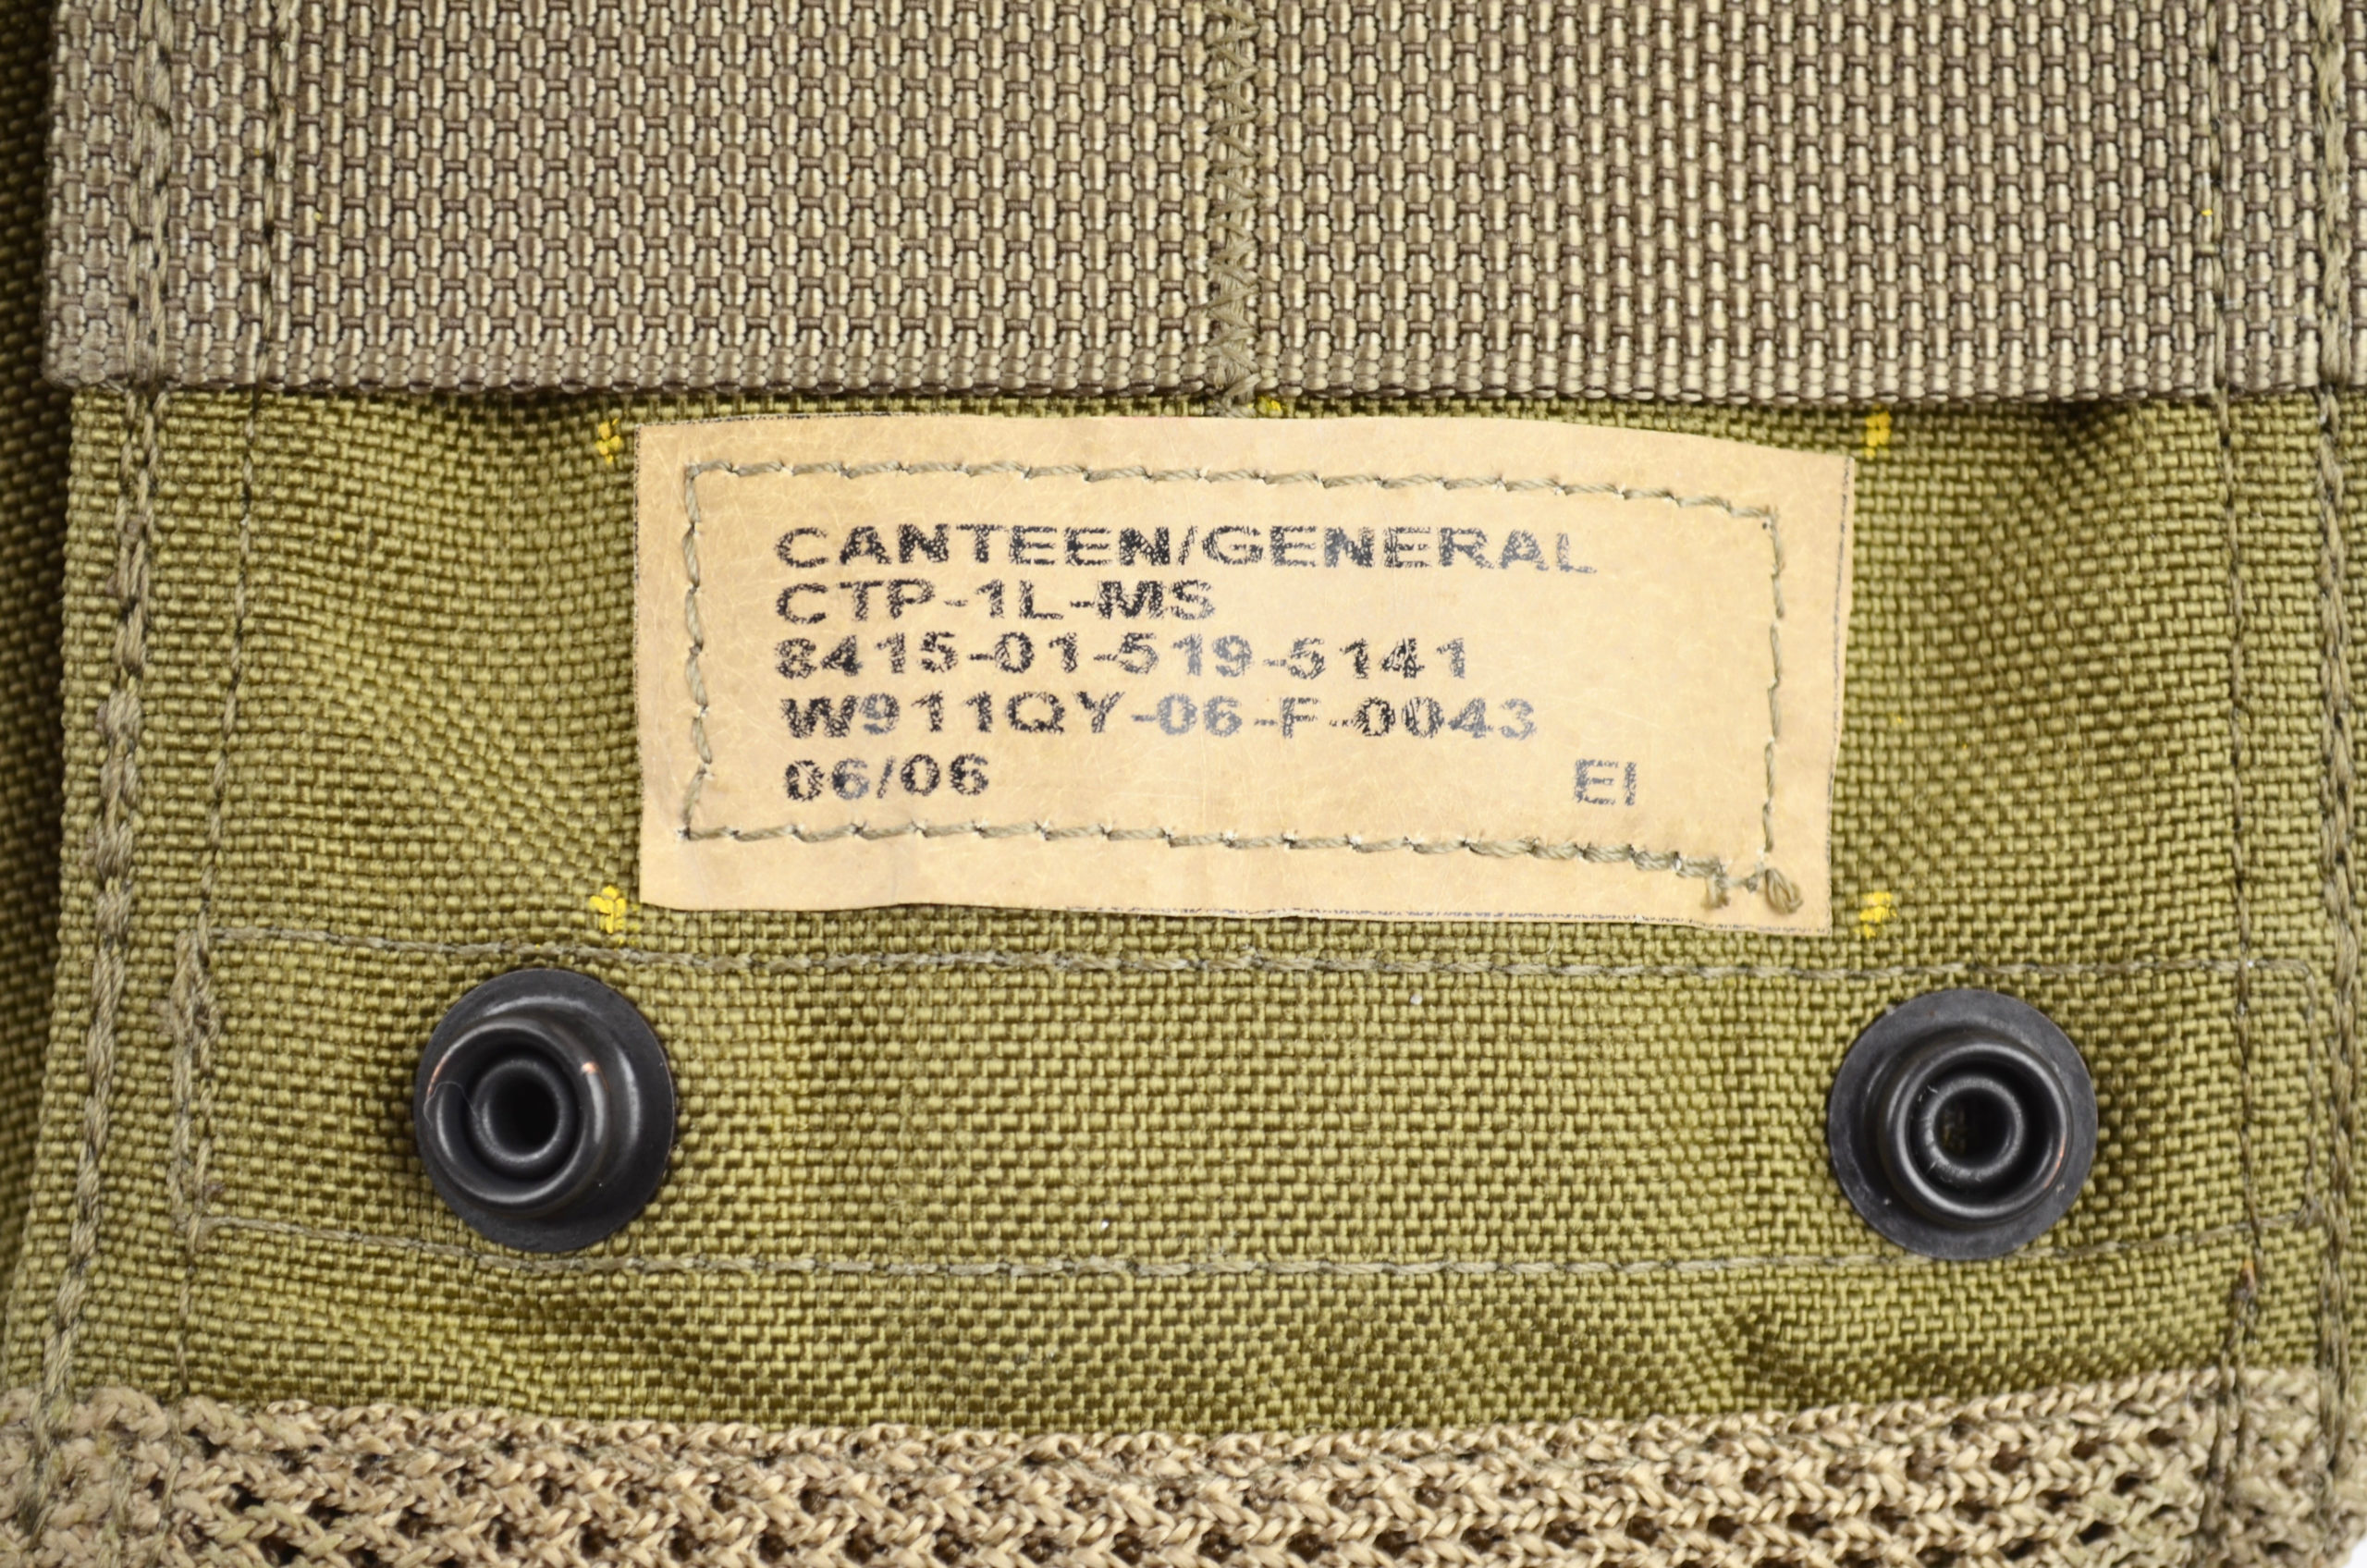 New Eagle Industries Canteen General Purpose Pouch Khaki 